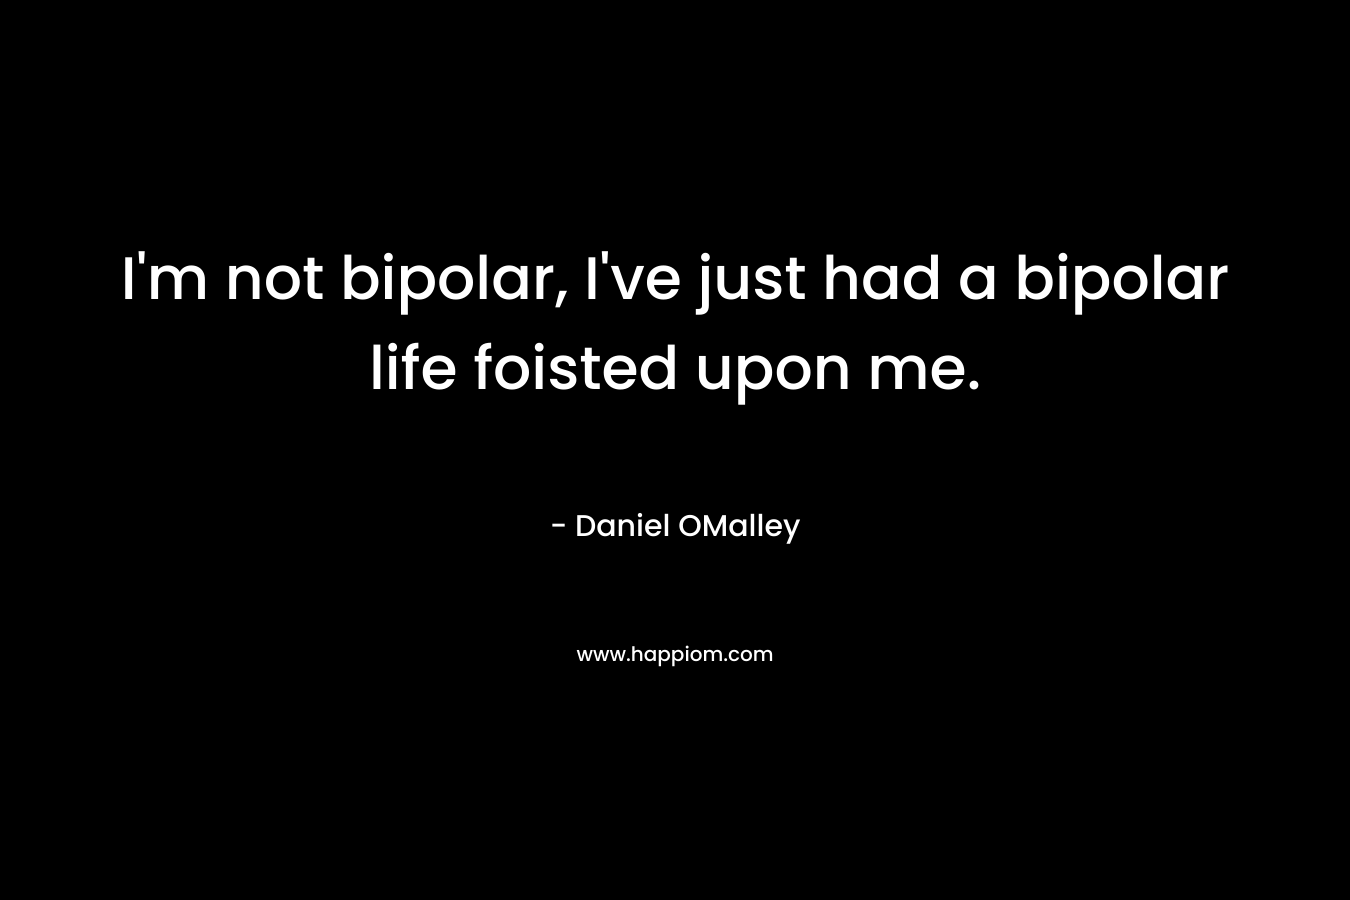 I’m not bipolar, I’ve just had a bipolar life foisted upon me. – Daniel OMalley